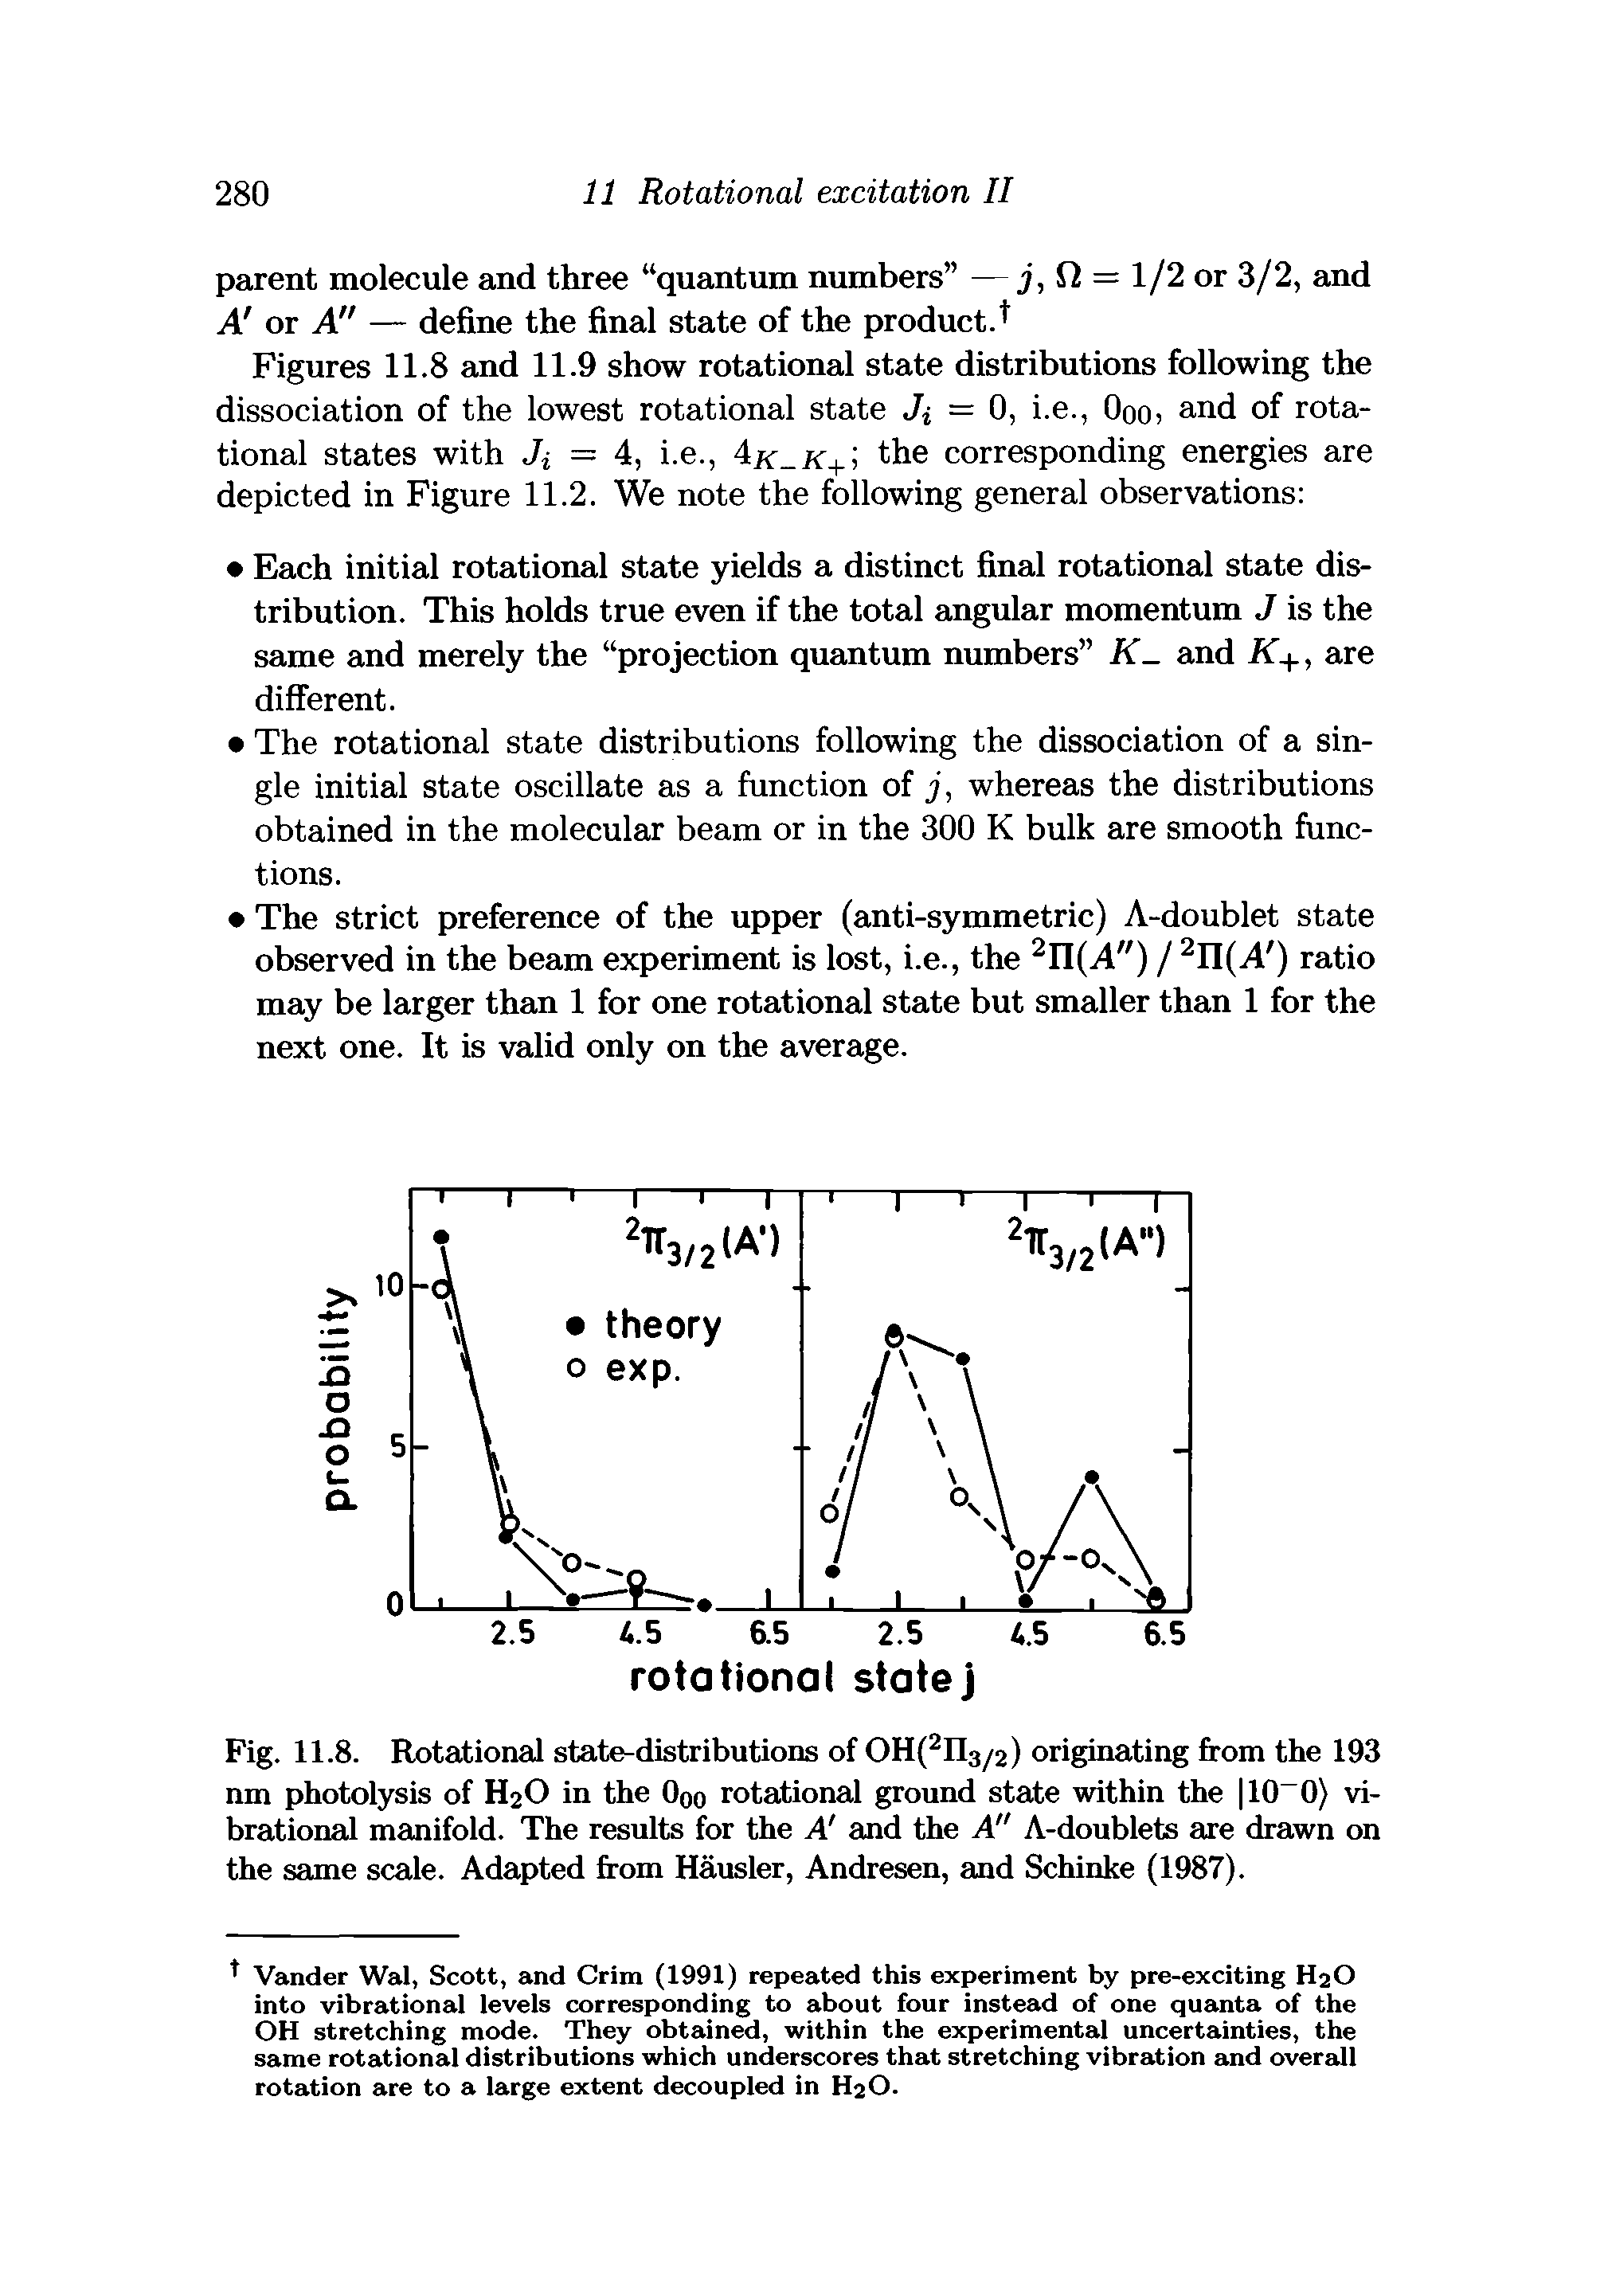 Fig. 11.8. Rotational state-distributions of OH(2n3/2) originating from the 193 nm photolysis of H2O in the Ooo rotational ground state within the 10 0) vibrational manifold. The results for the A and the A" A-doublets are drawn on the same scale. Adapted from Hausler, Andresen, and Schinke (1987).